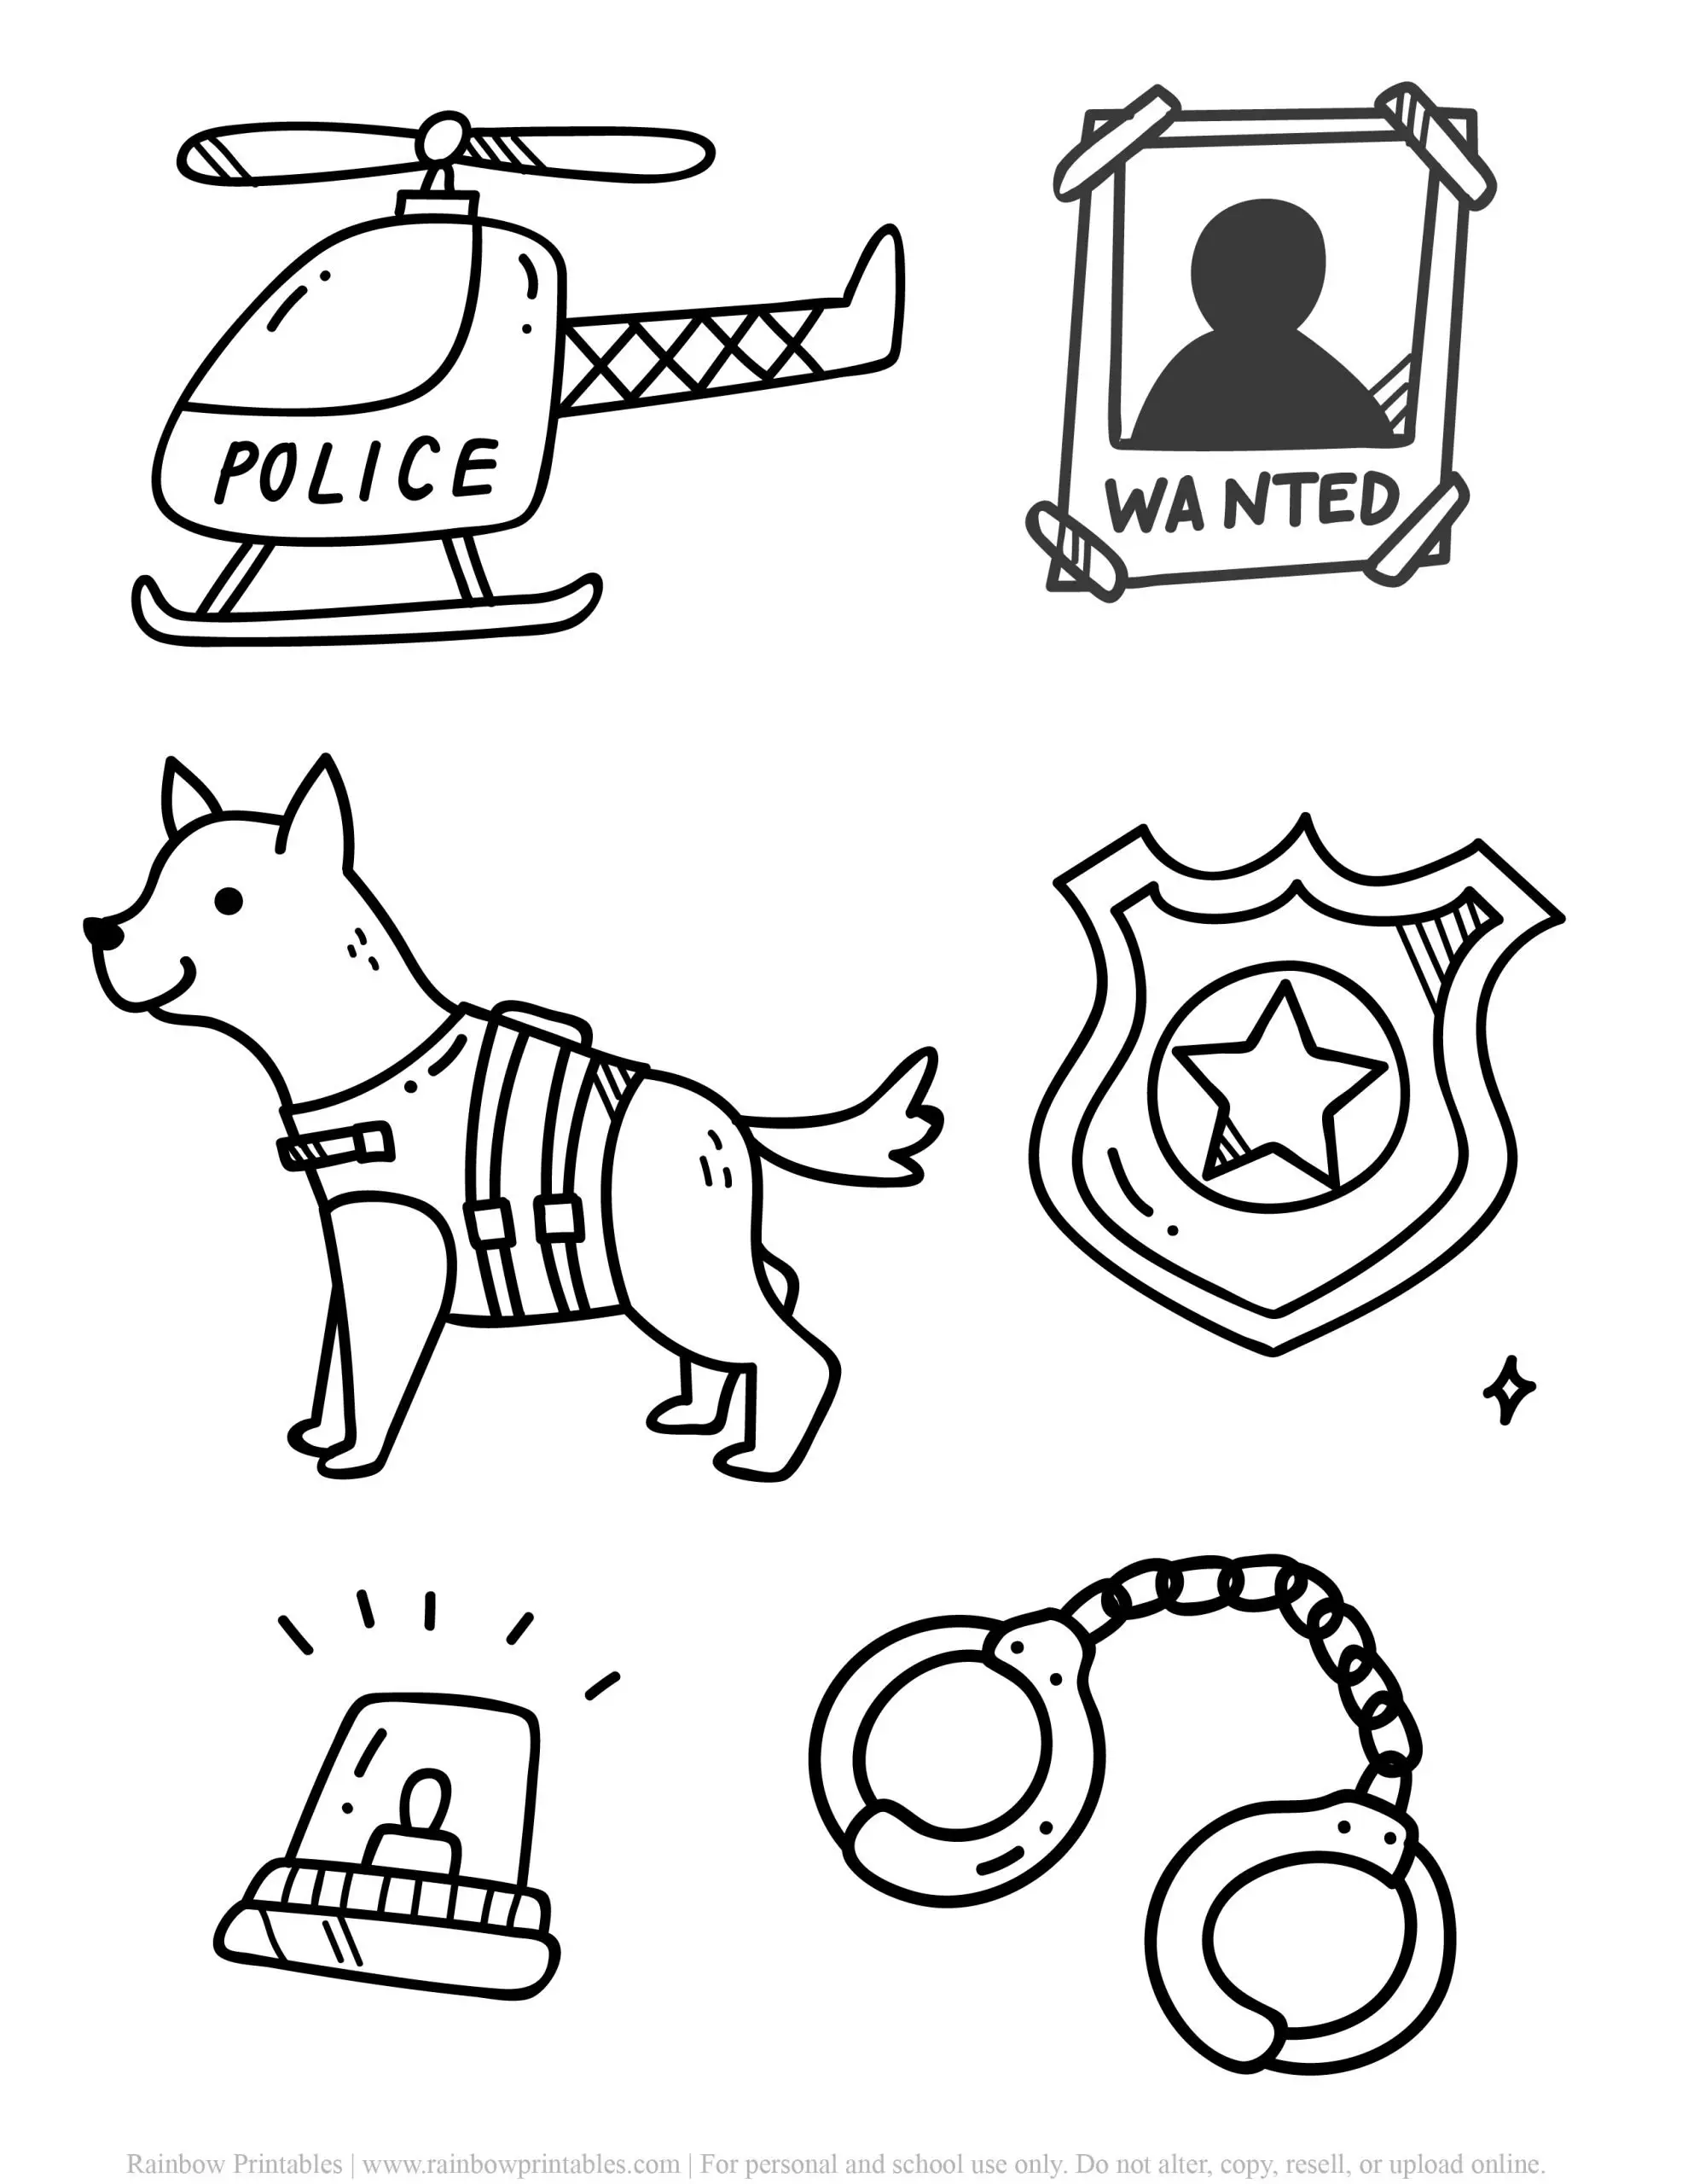 Community Helper Police Dog, Helicopter, Wanted Sign, Badge, Siren Handcuff, Clipart, Community for Young Children Coloring Page